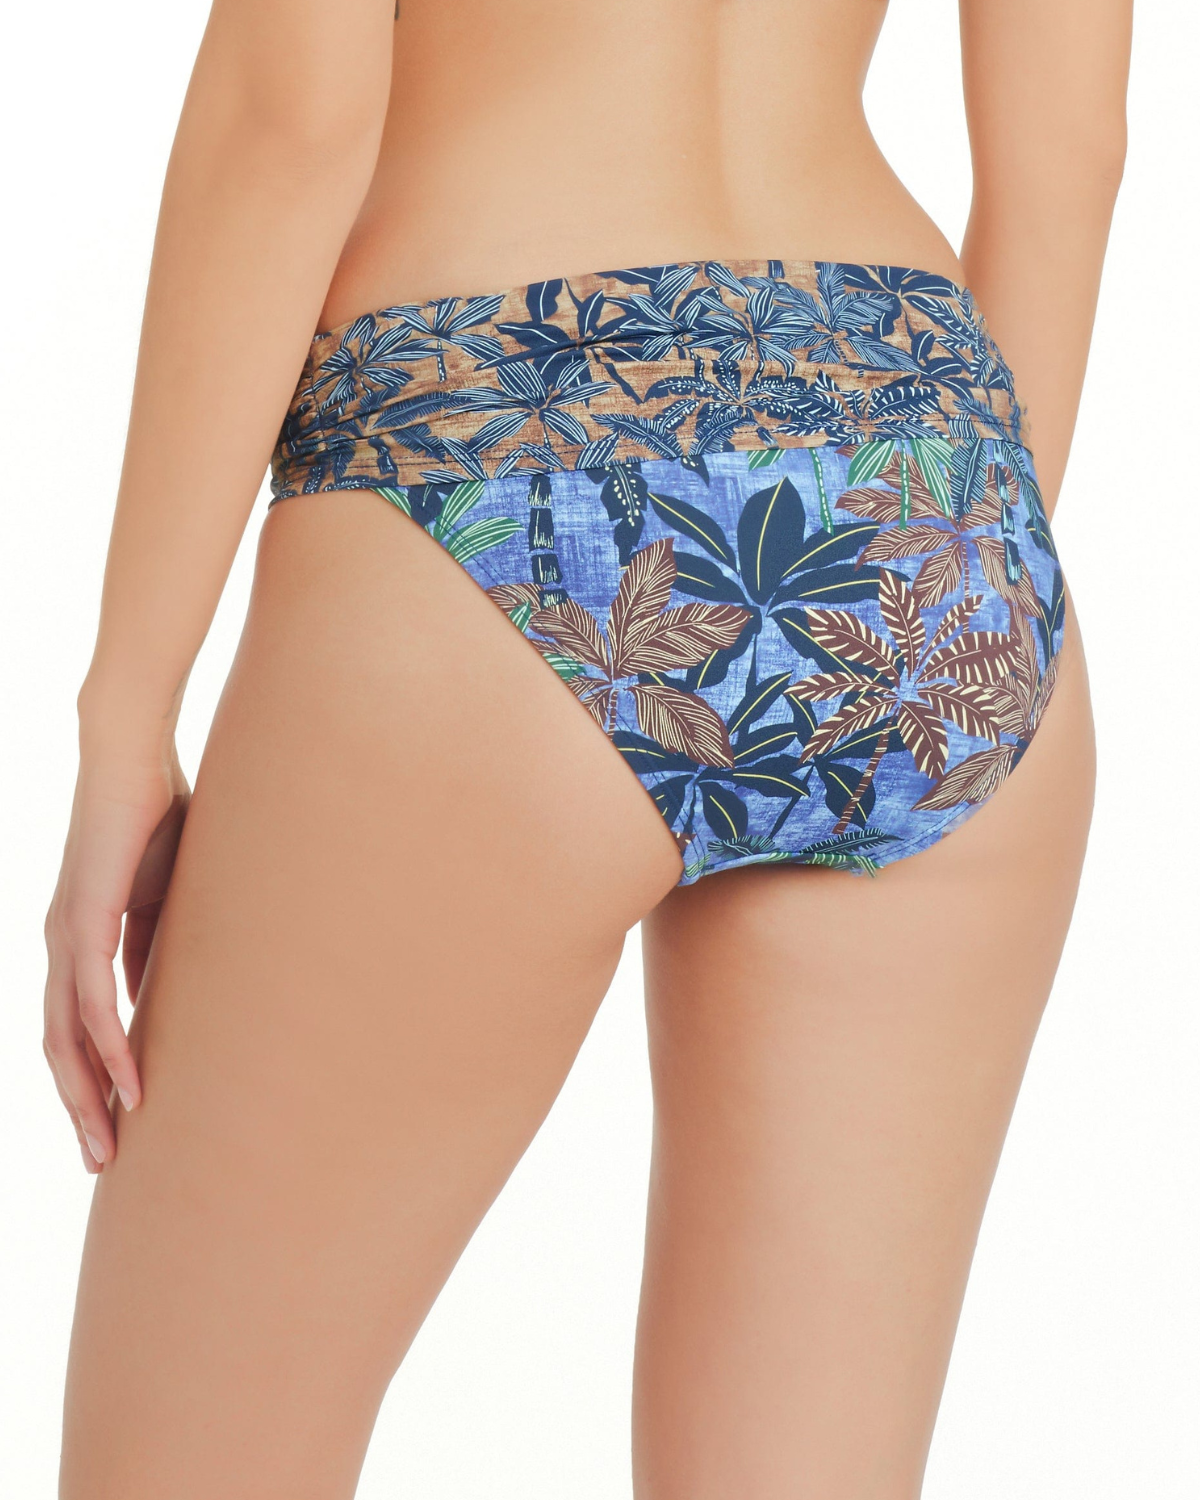 Model wearing a sarong hipster bikini bottom in a navy, brown and green palm frond print